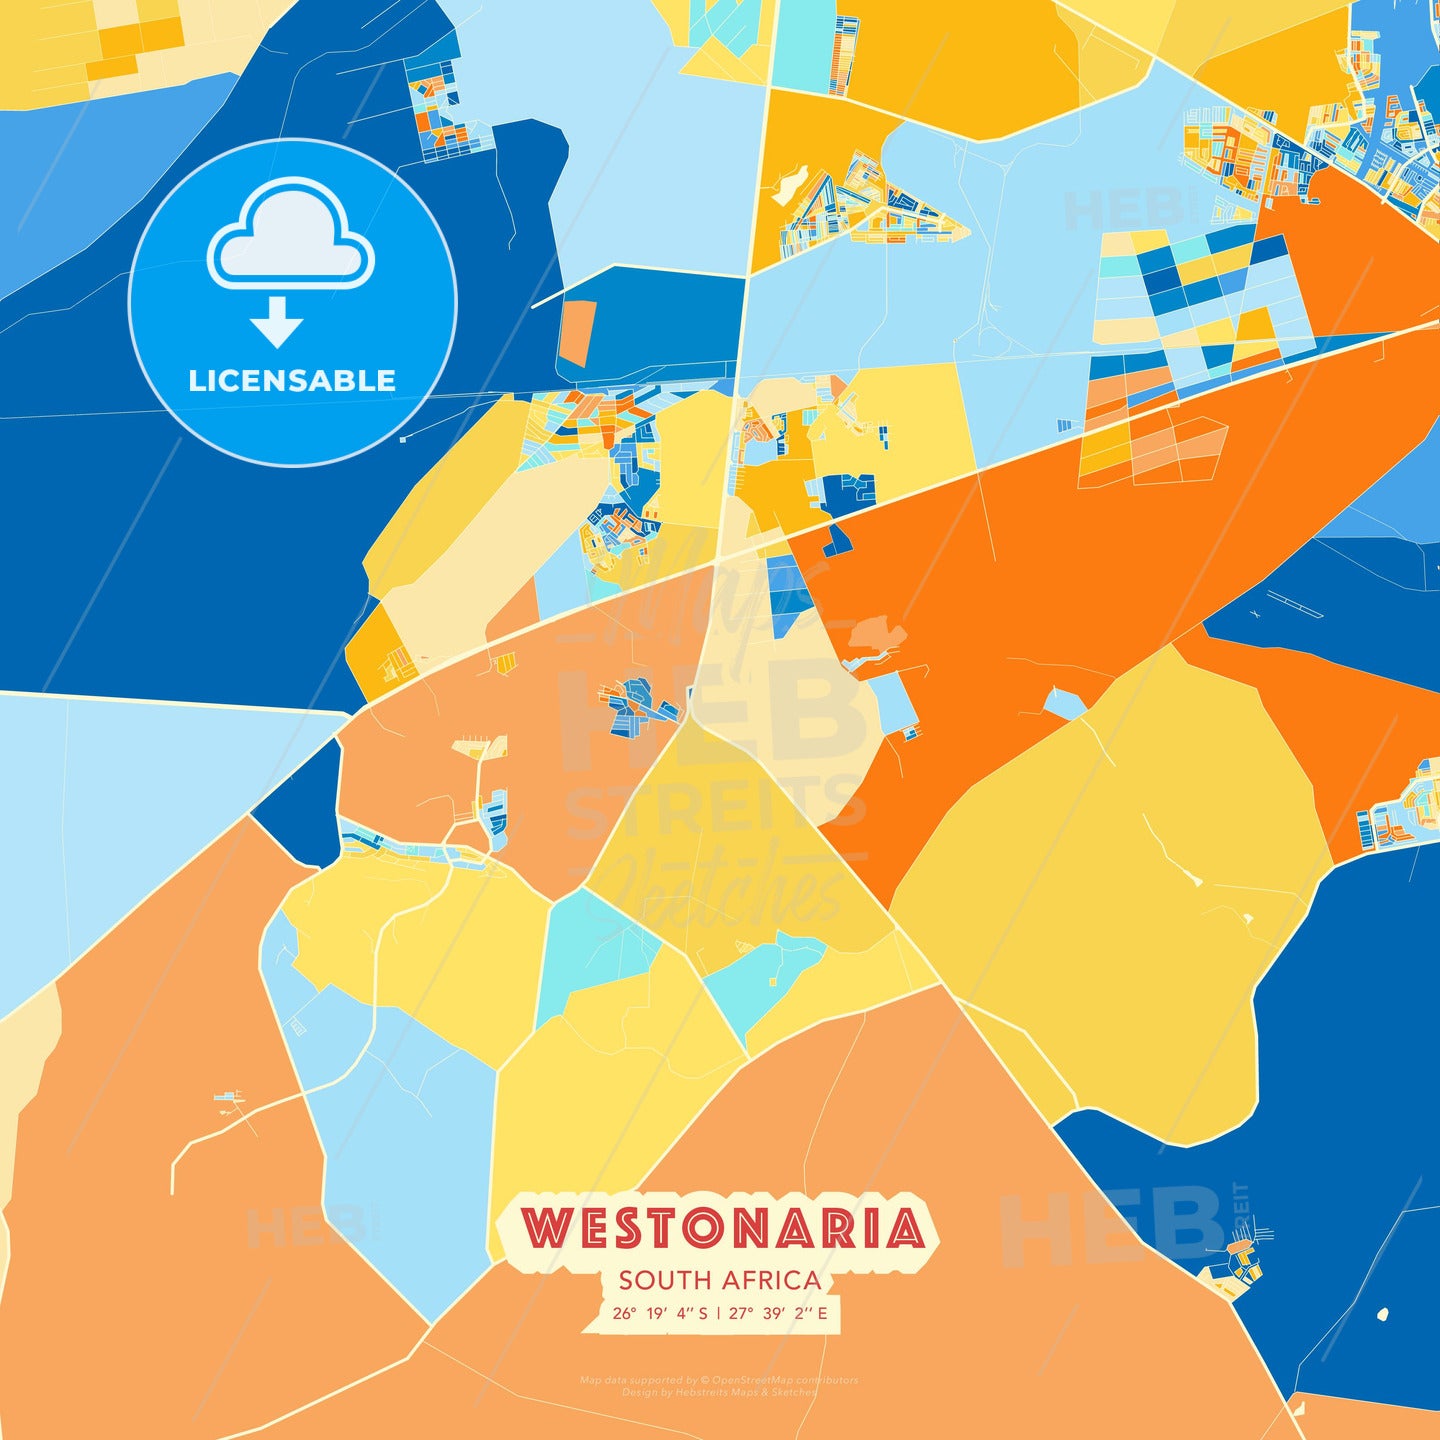 Westonaria, South Africa, map - HEBSTREITS Sketches